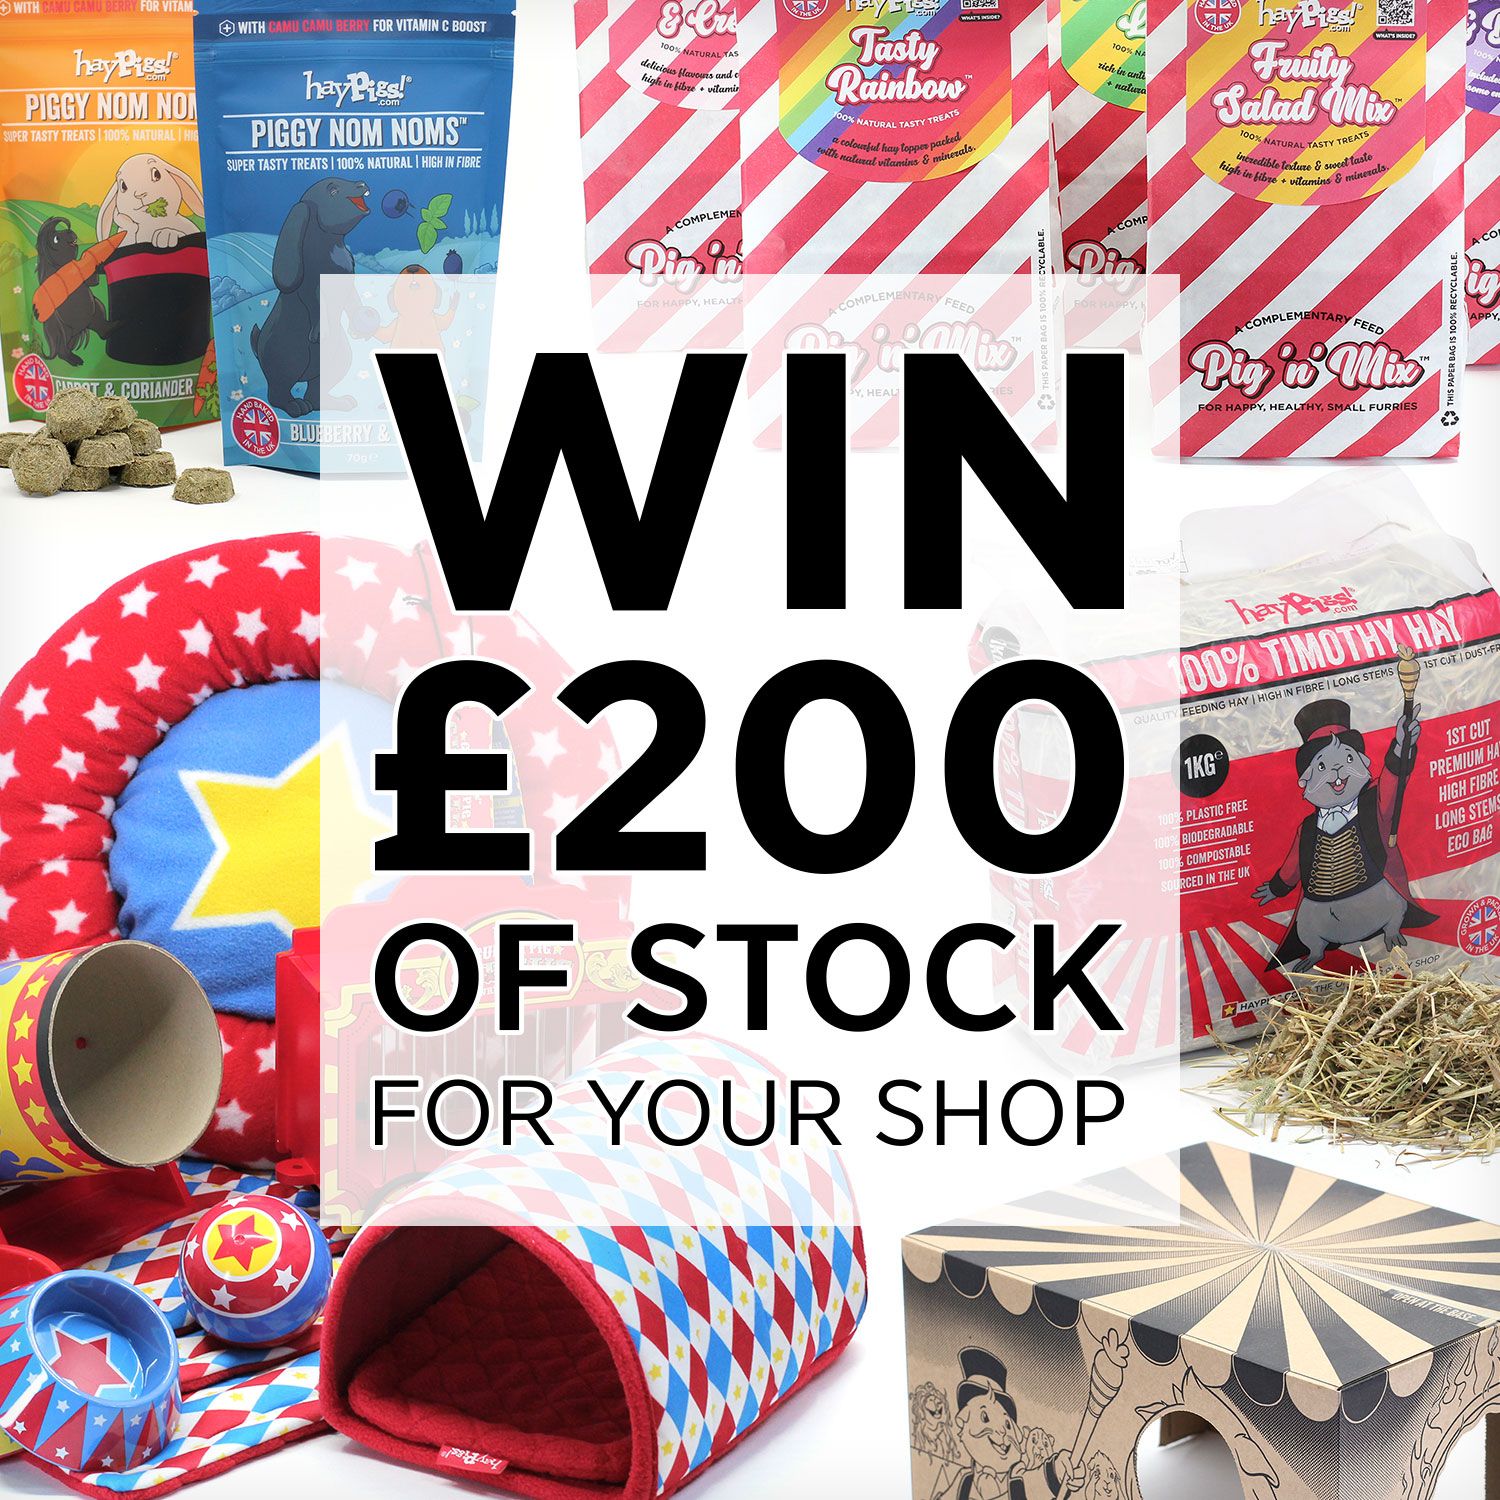 Win £200 of stock for your shop!